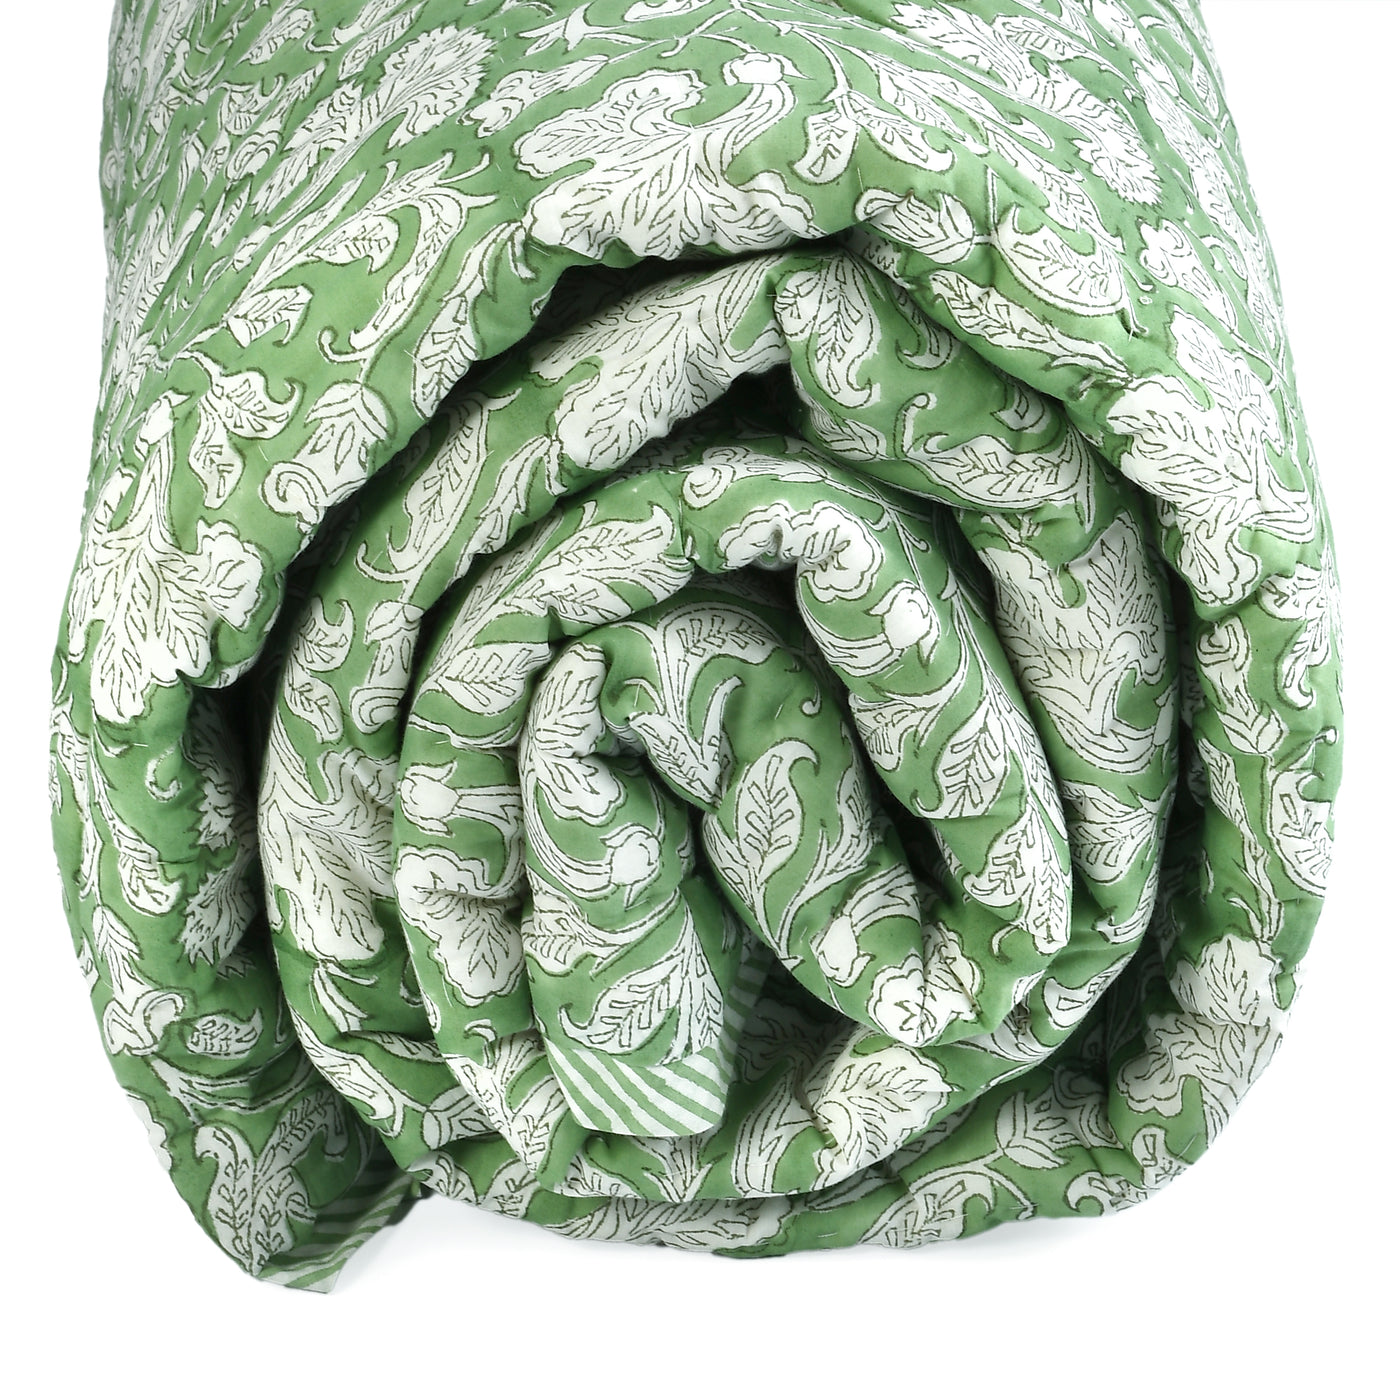 Fabricrush Indian Hand Block Print Quilted Throw Blanket 100% Cotton Quilt, Cover for Couch and Bed